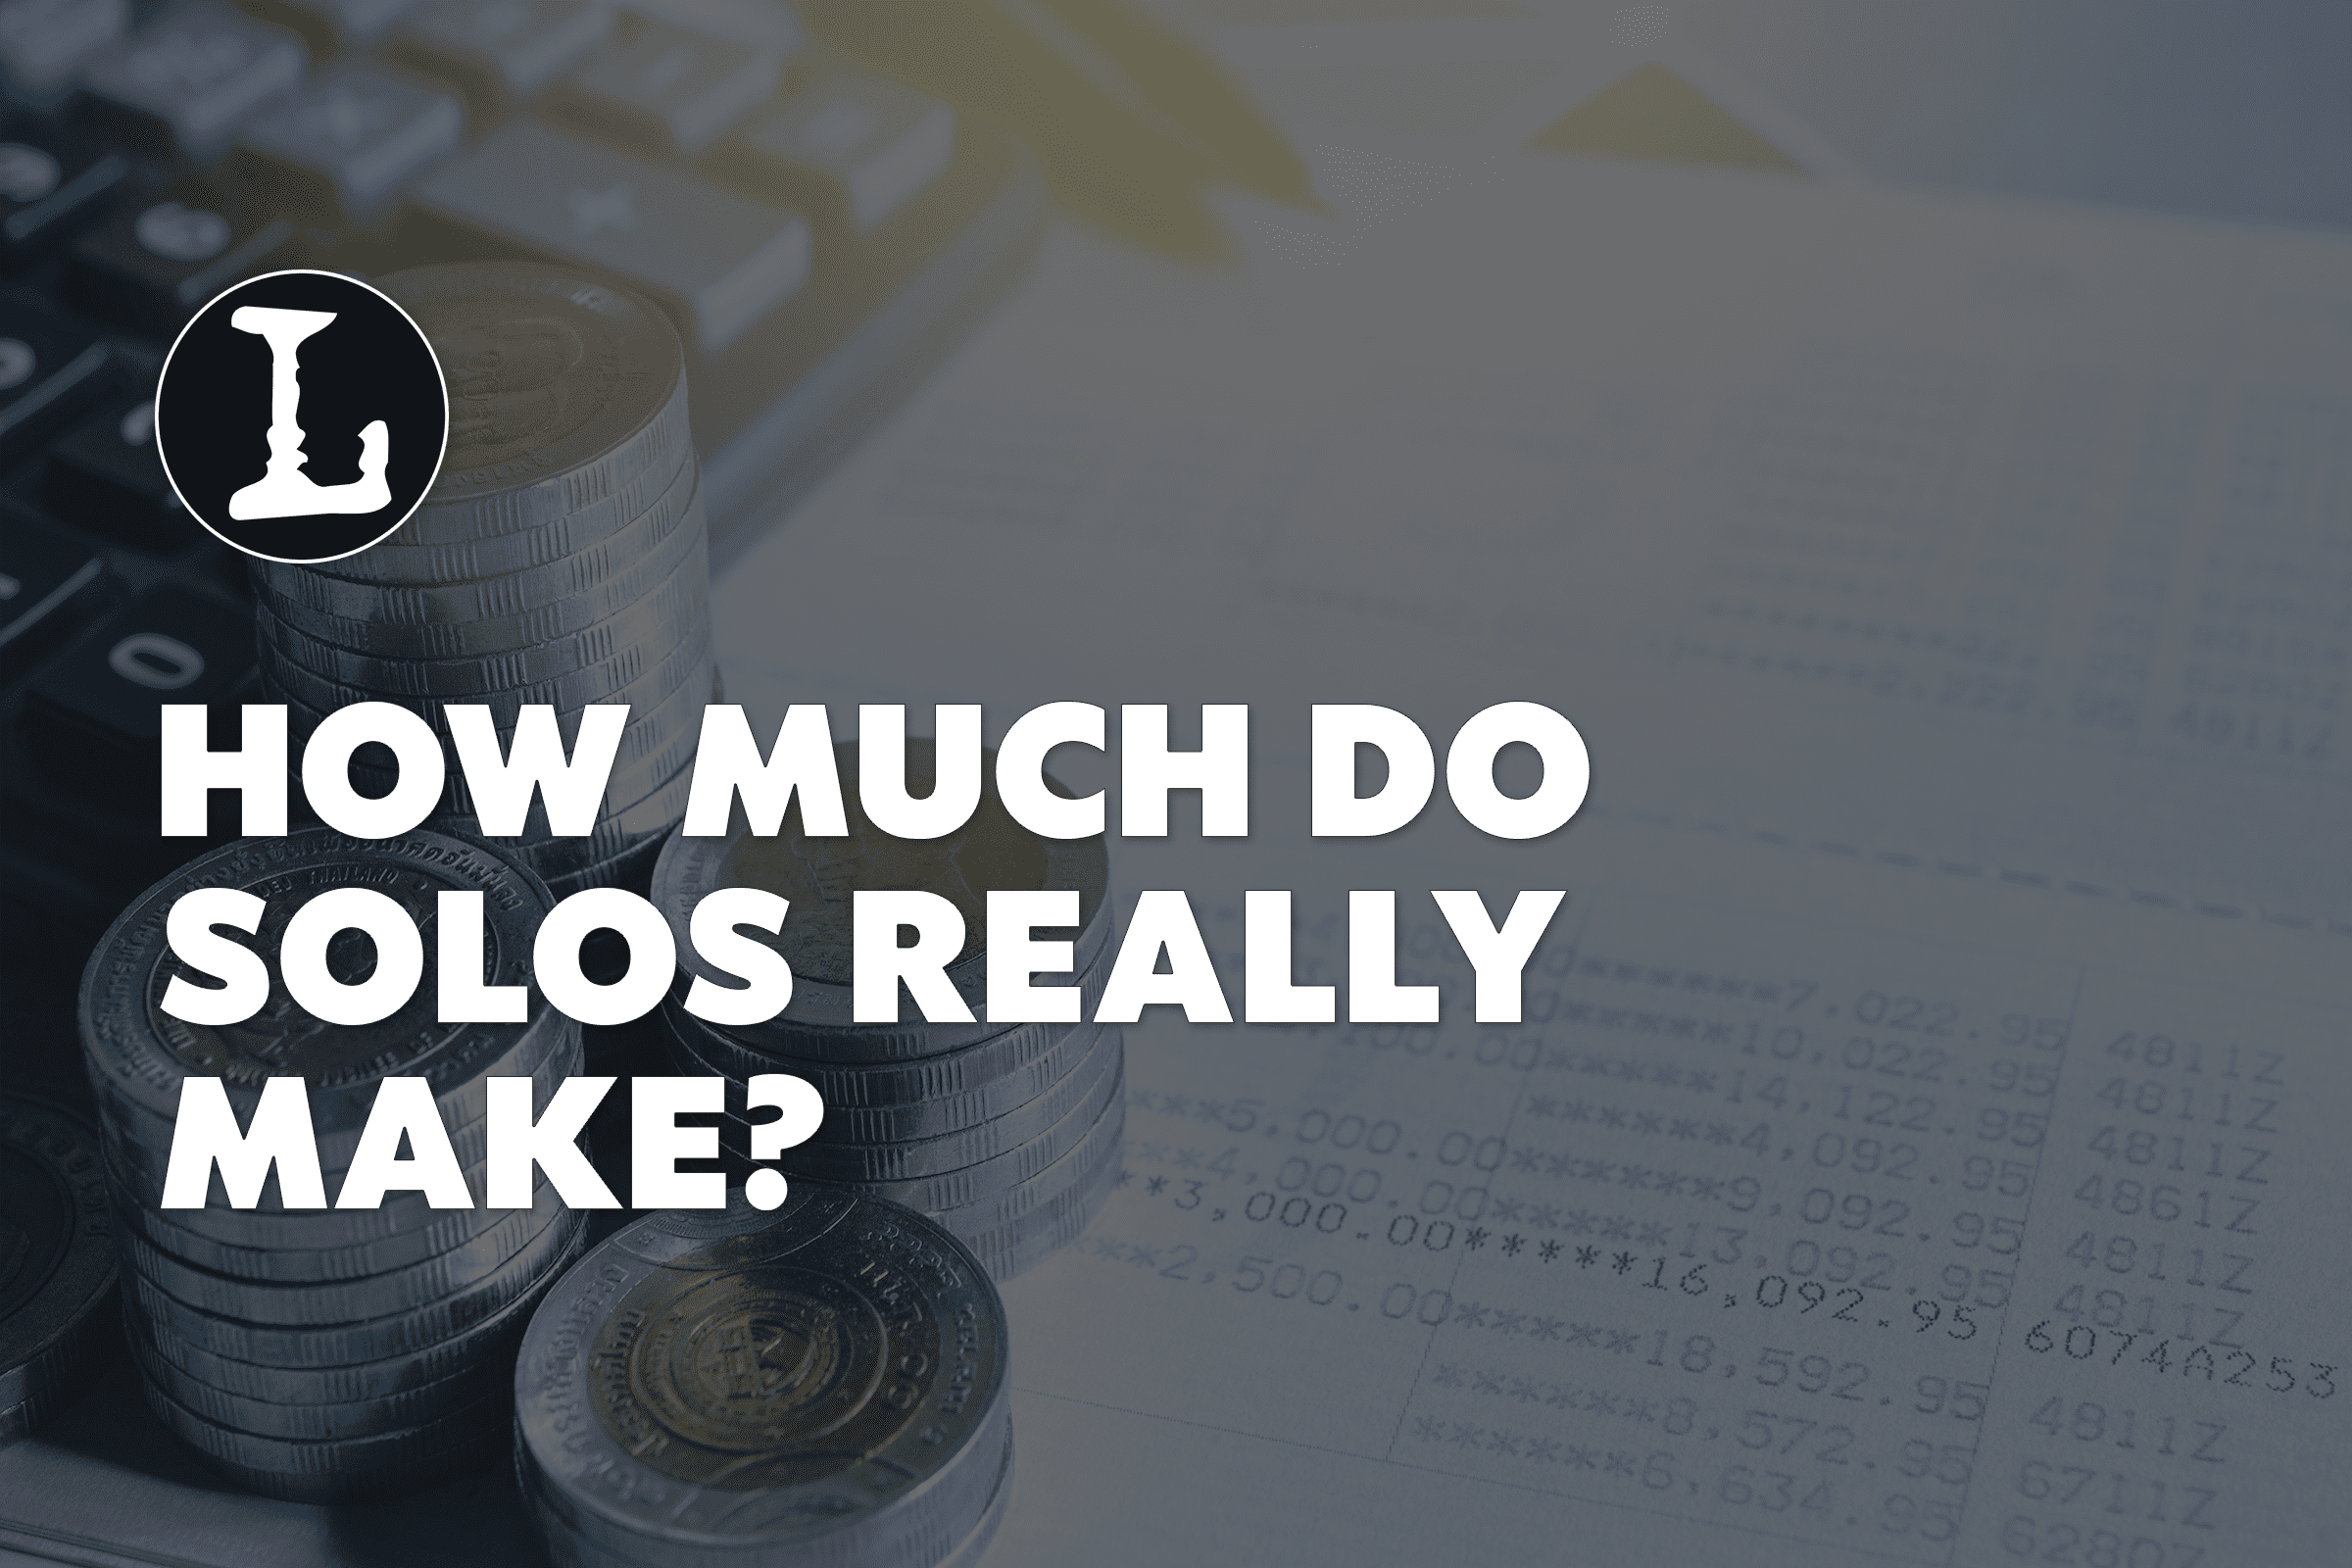 How much do solos really make?